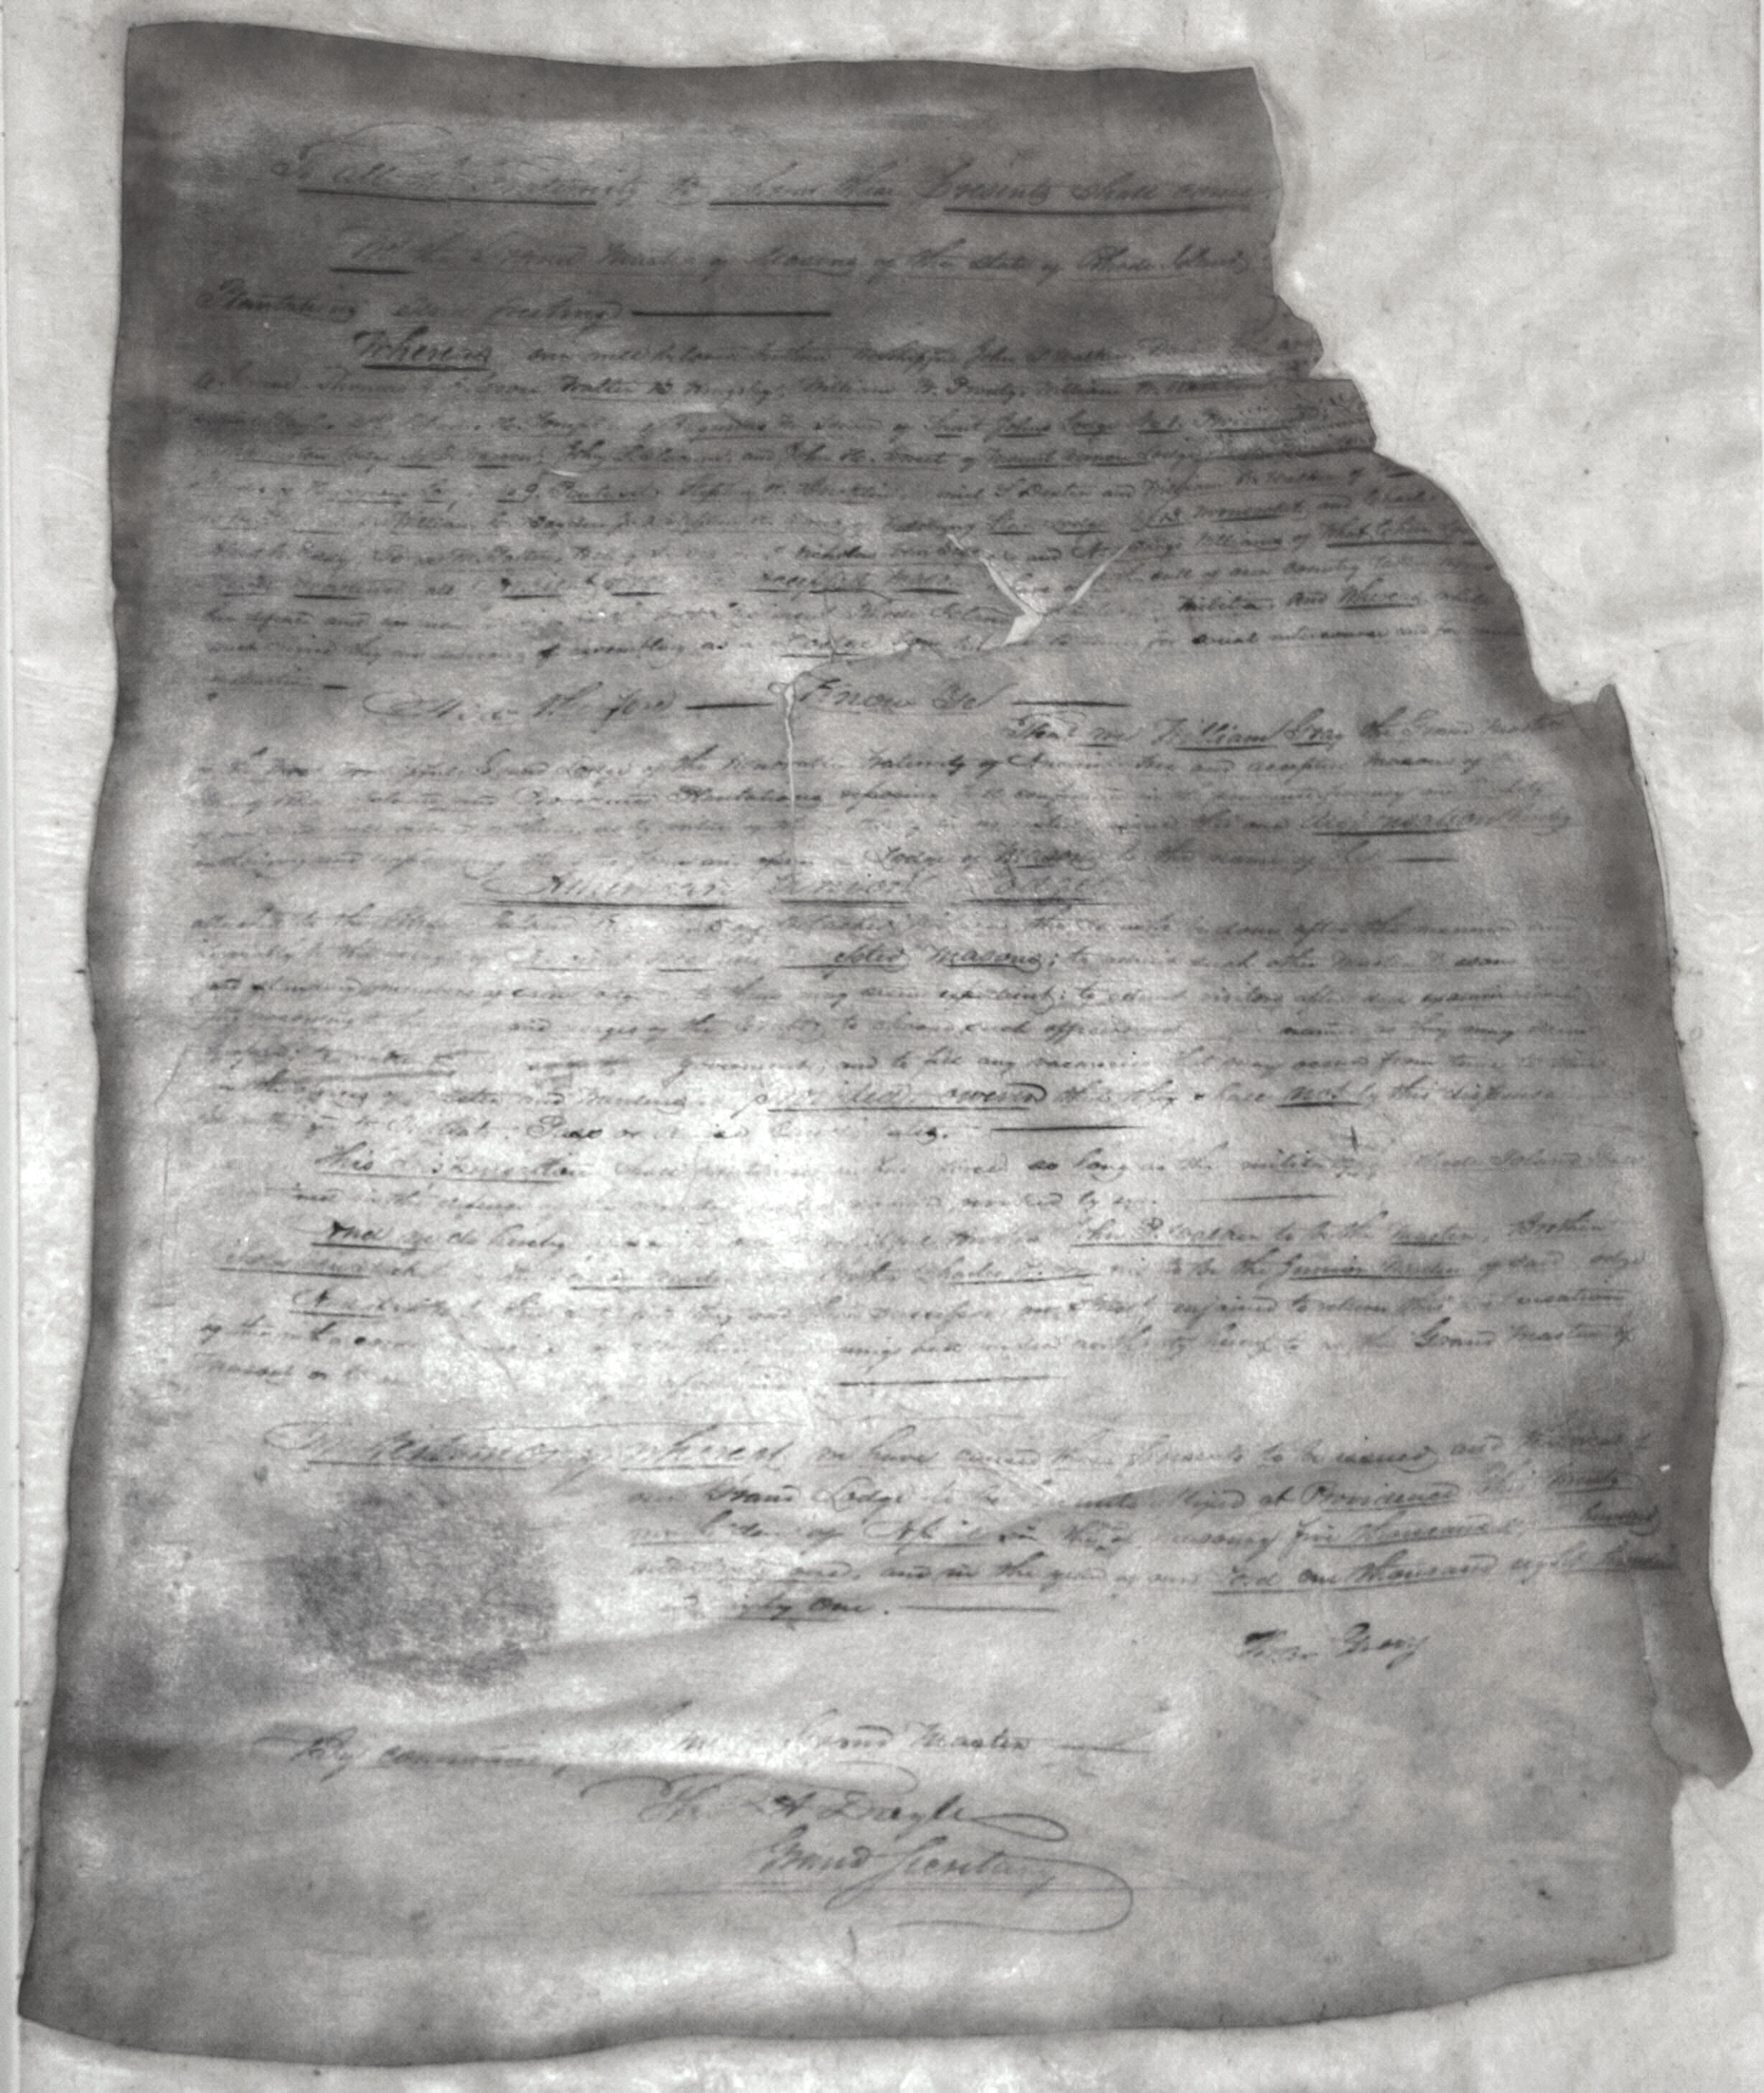 Original Charter of American Union Lodge organised in April 1861. Rhode Island Grand Lodge Library collection